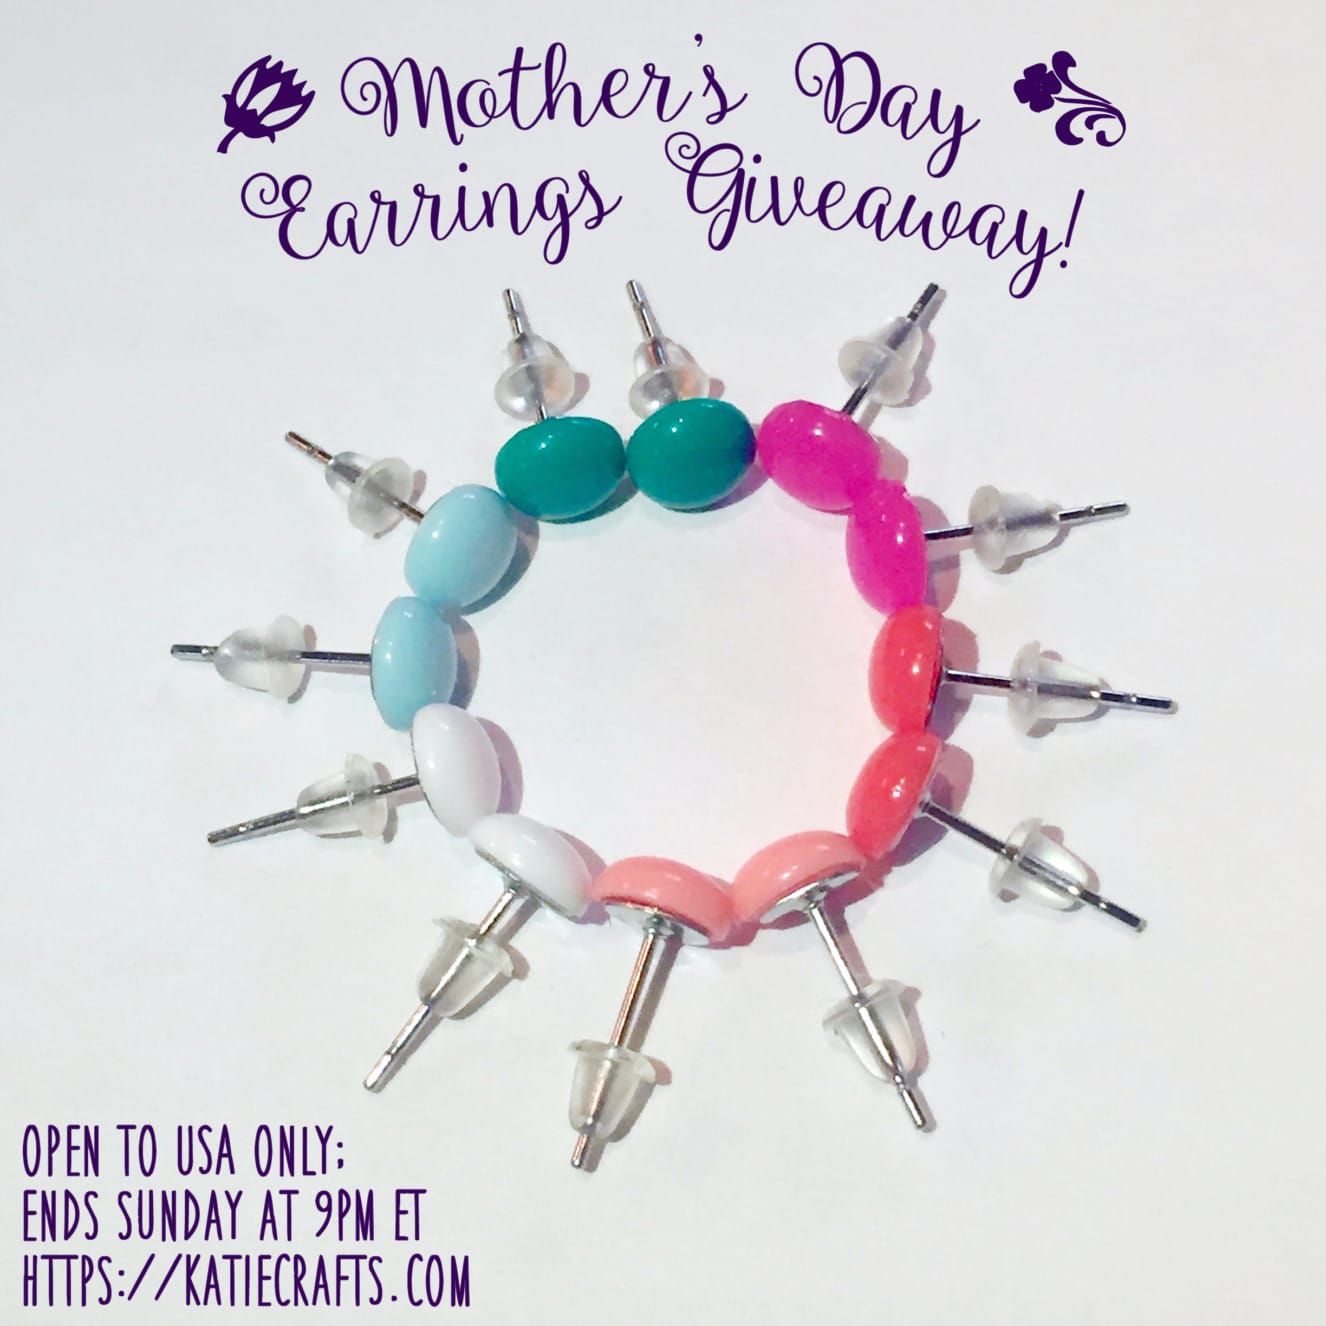 Mother's Day Earrings Giveaway! on Katie Crafts; https://www.katiecrafts.com